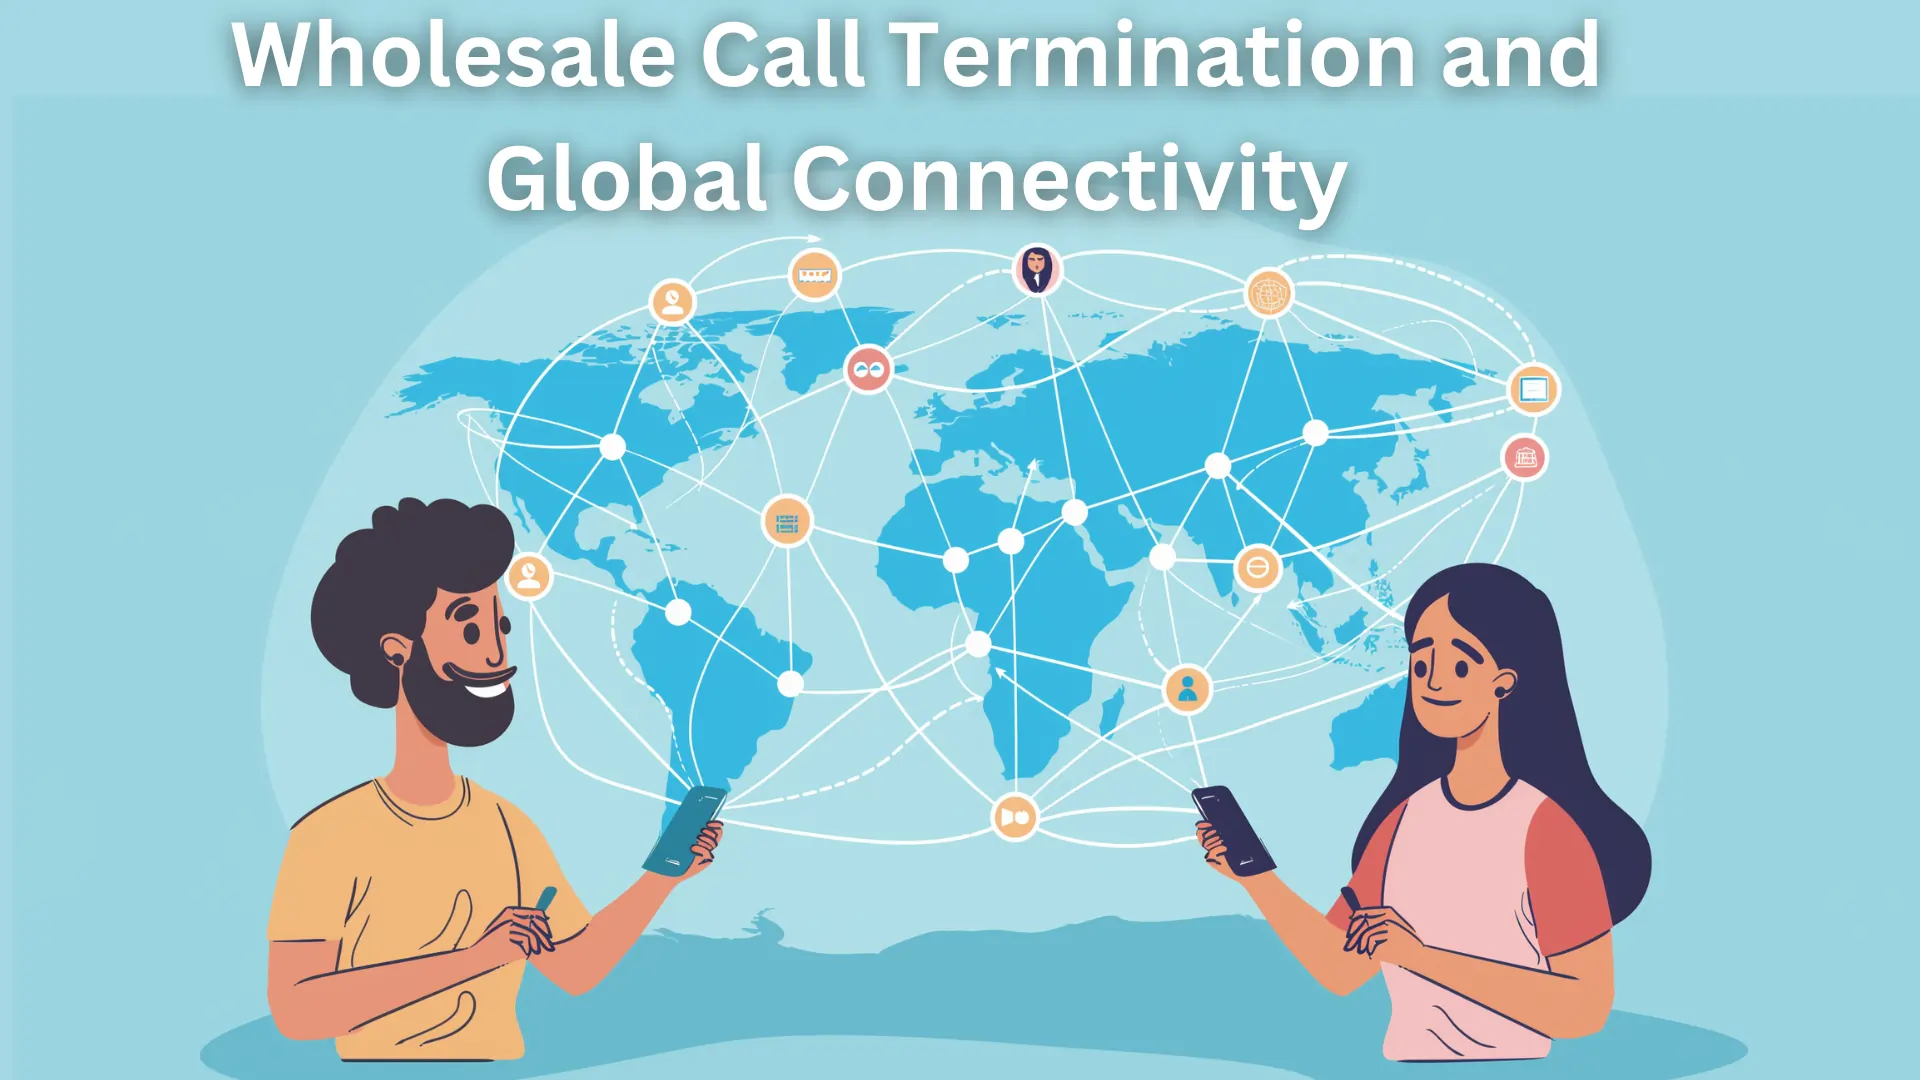 Wholesale Call Termination and Global Connectivity